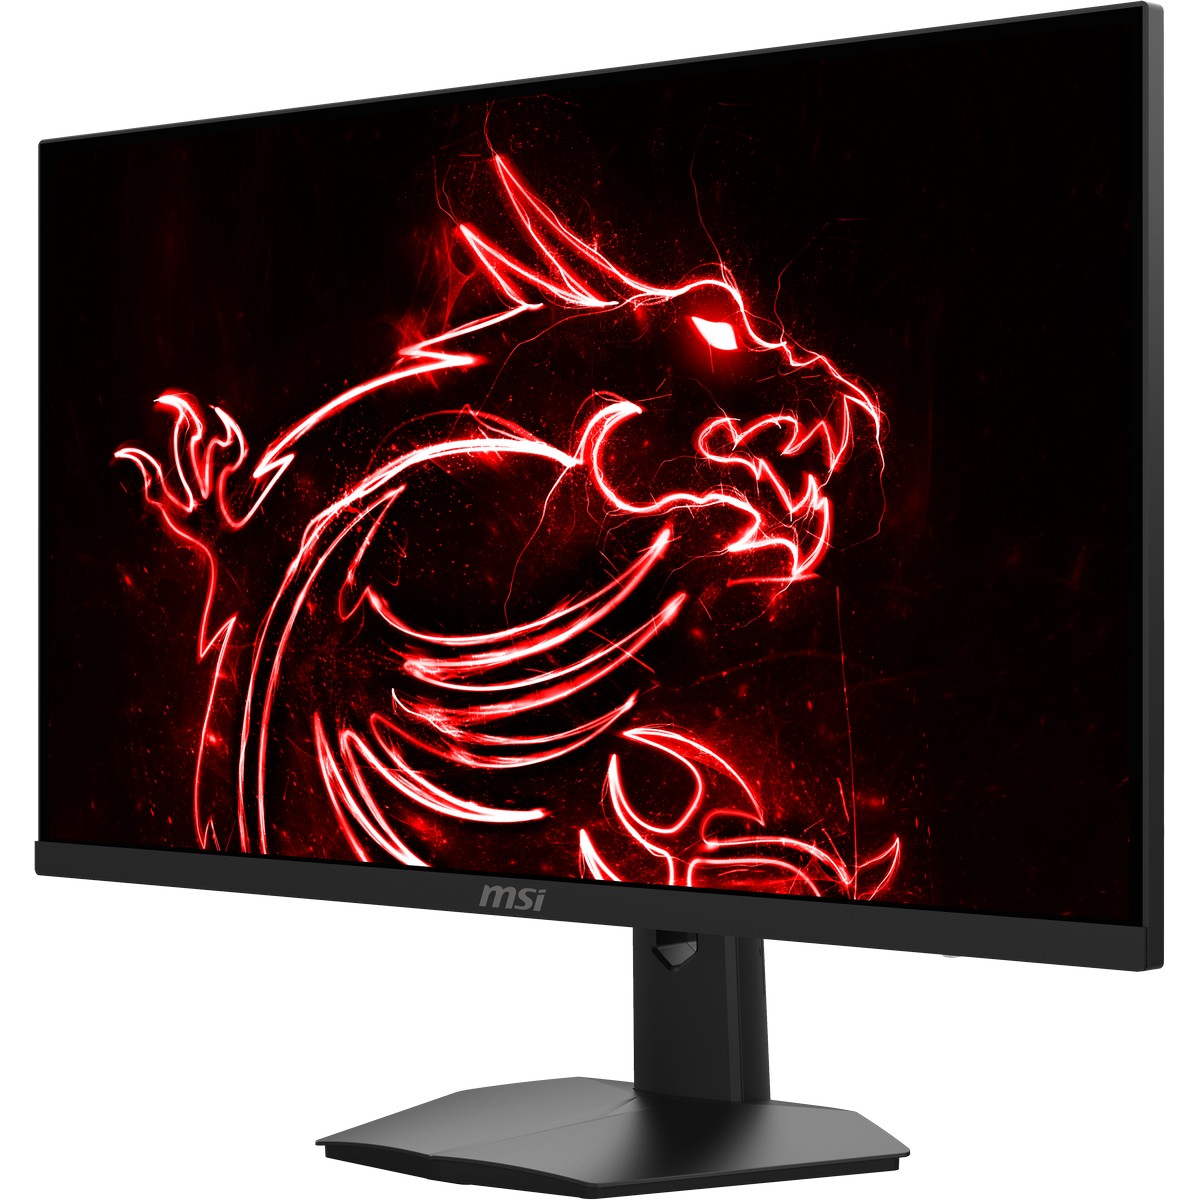 MSI - MSI 27" G274F 1920x1080 IPS 180Hz A-Sync Widescreen Gaming Monitor